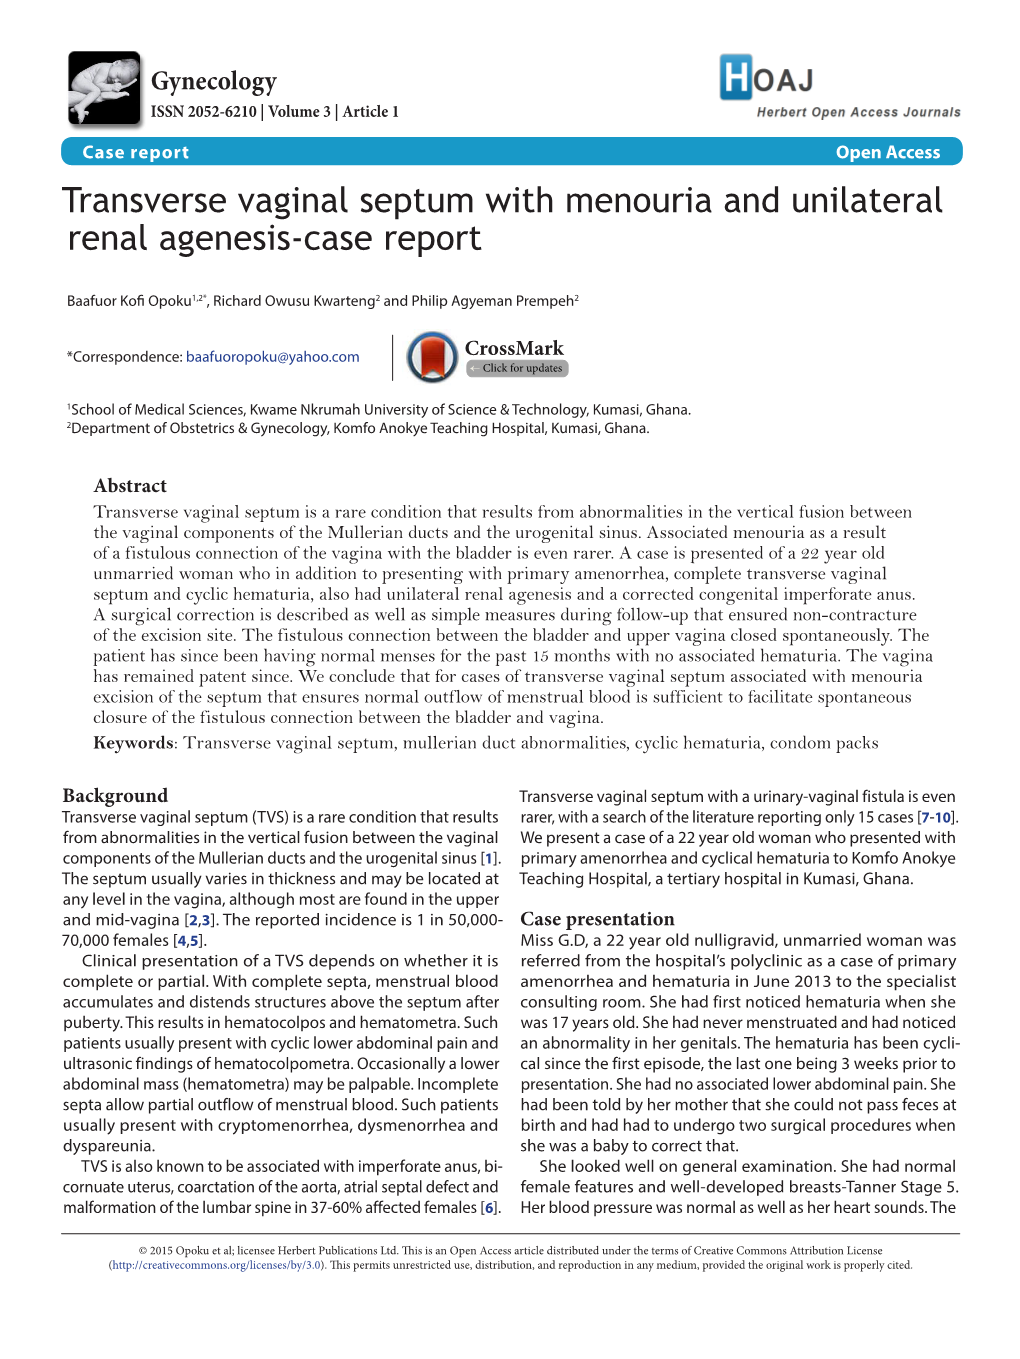 Transverse Vaginal Septum with Menouria and Unilateral Renal Agenesis-Case Report